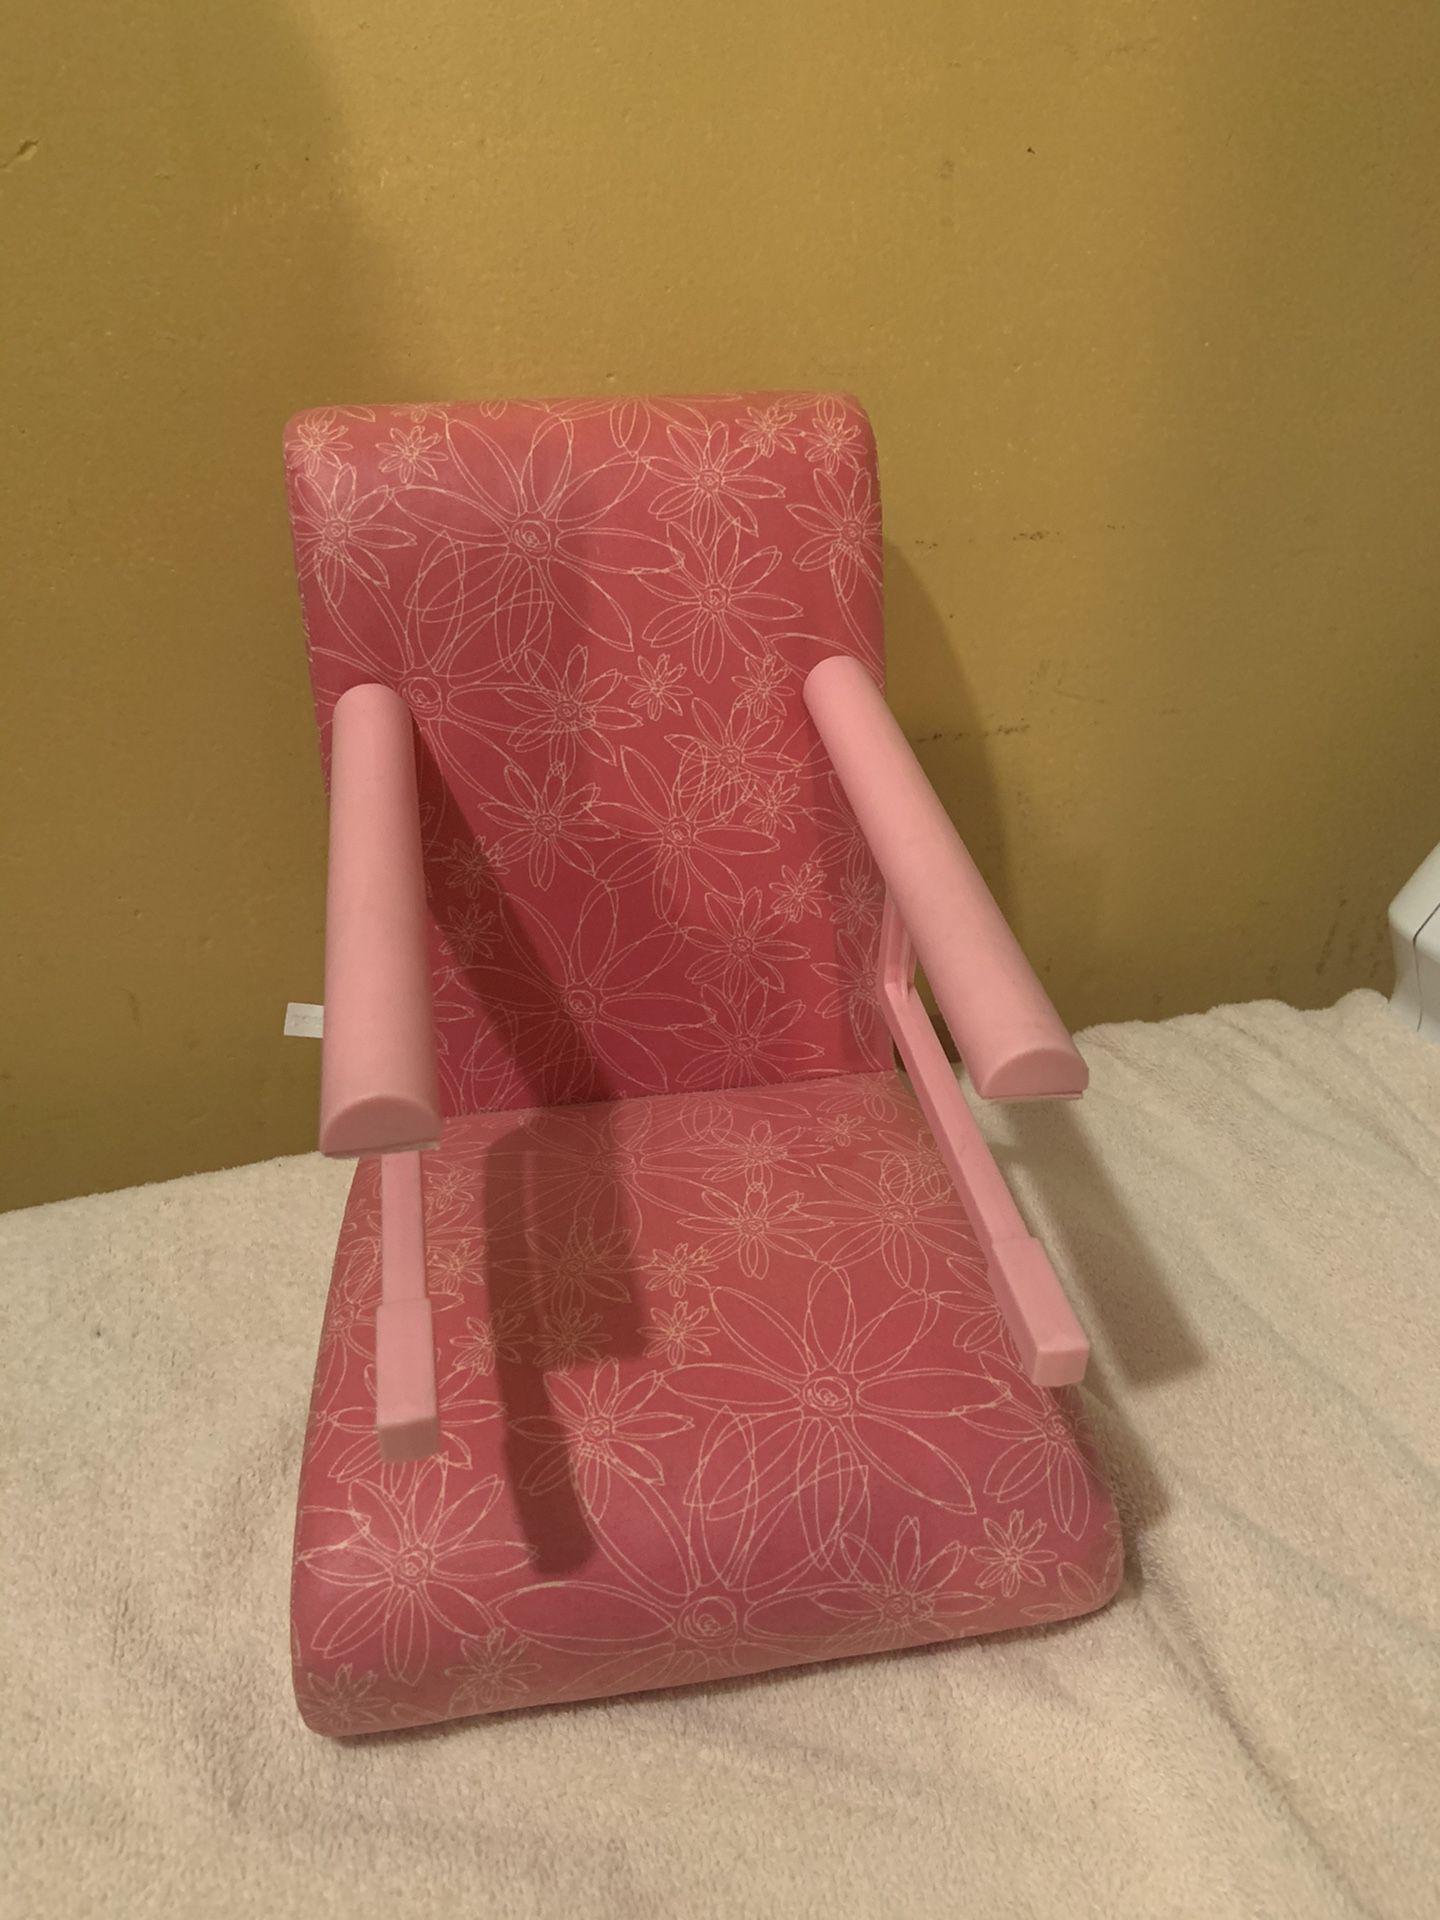 American girl Bistro dining chair for an 18” doll